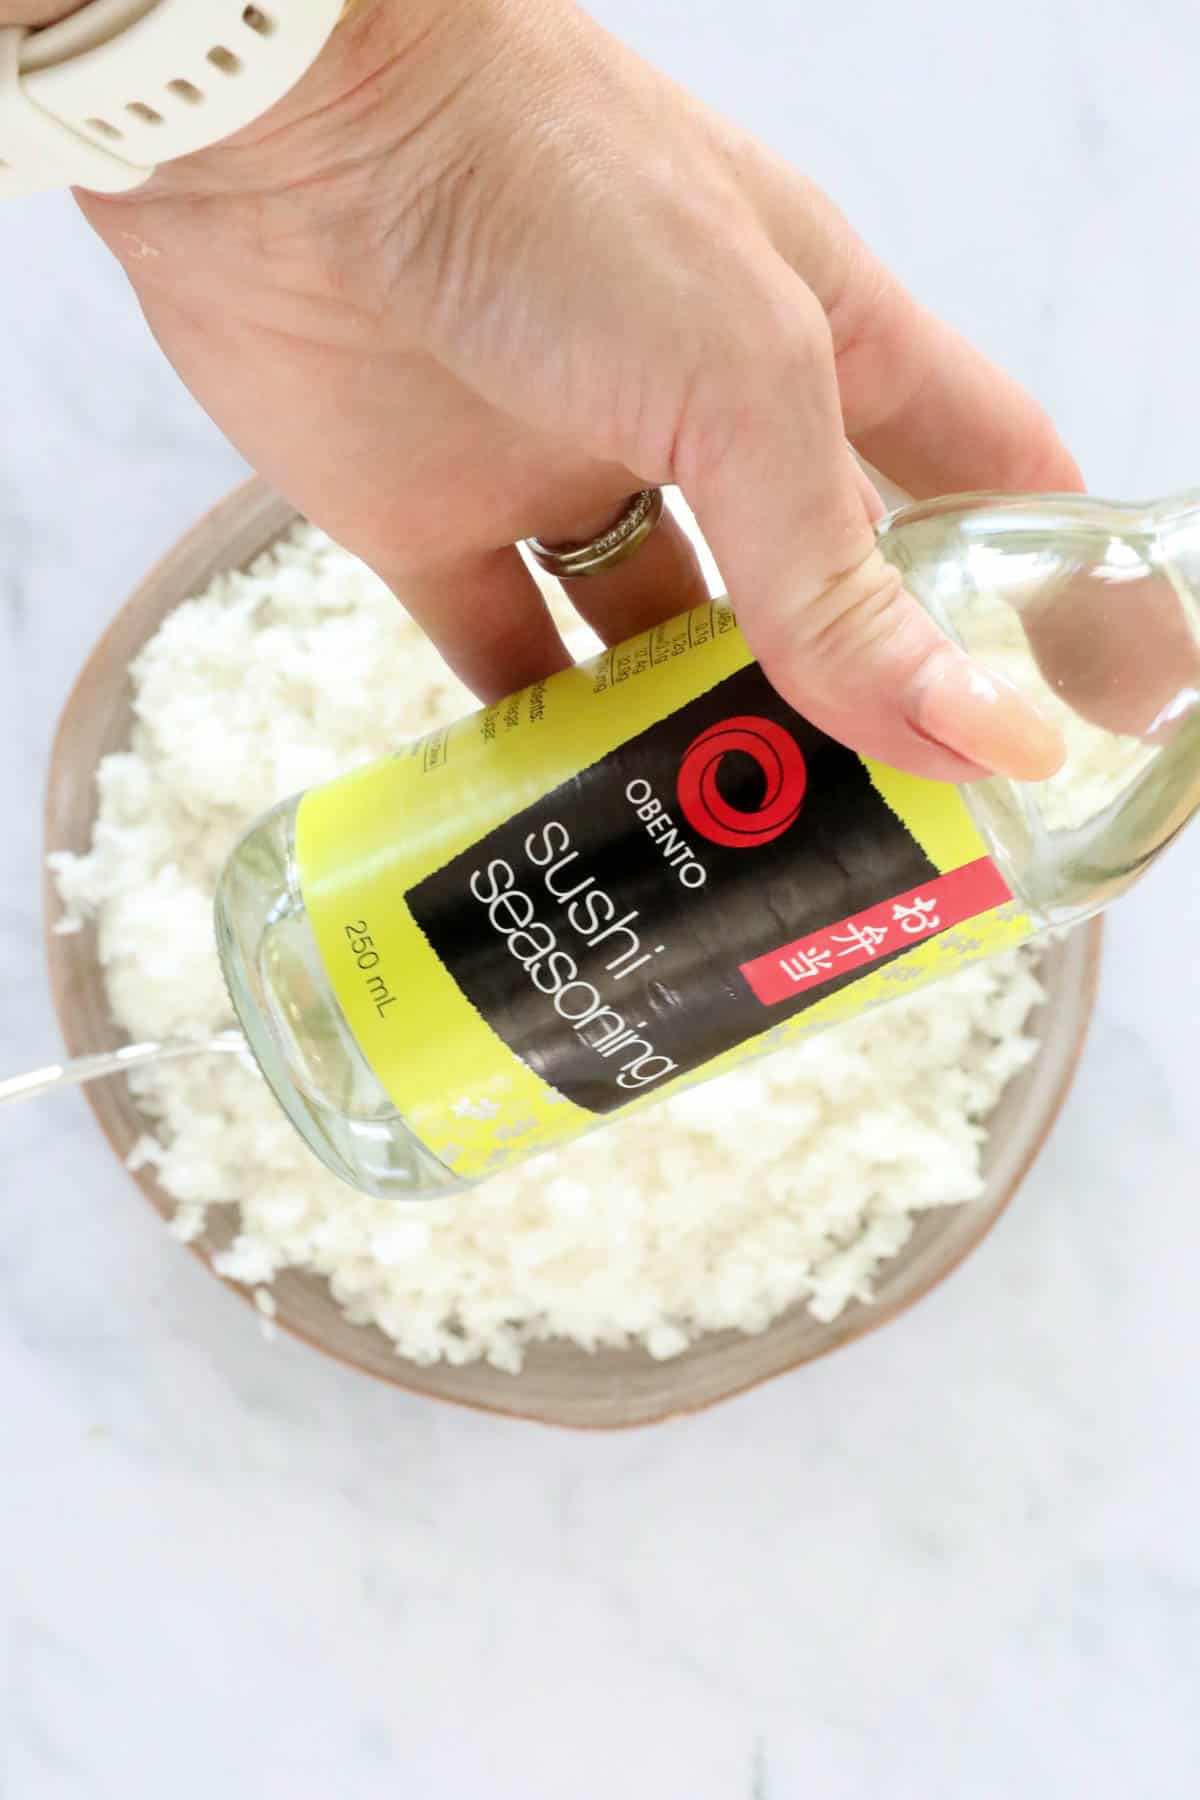 A bottle of sushi seasoningheld over a bowl of rice.